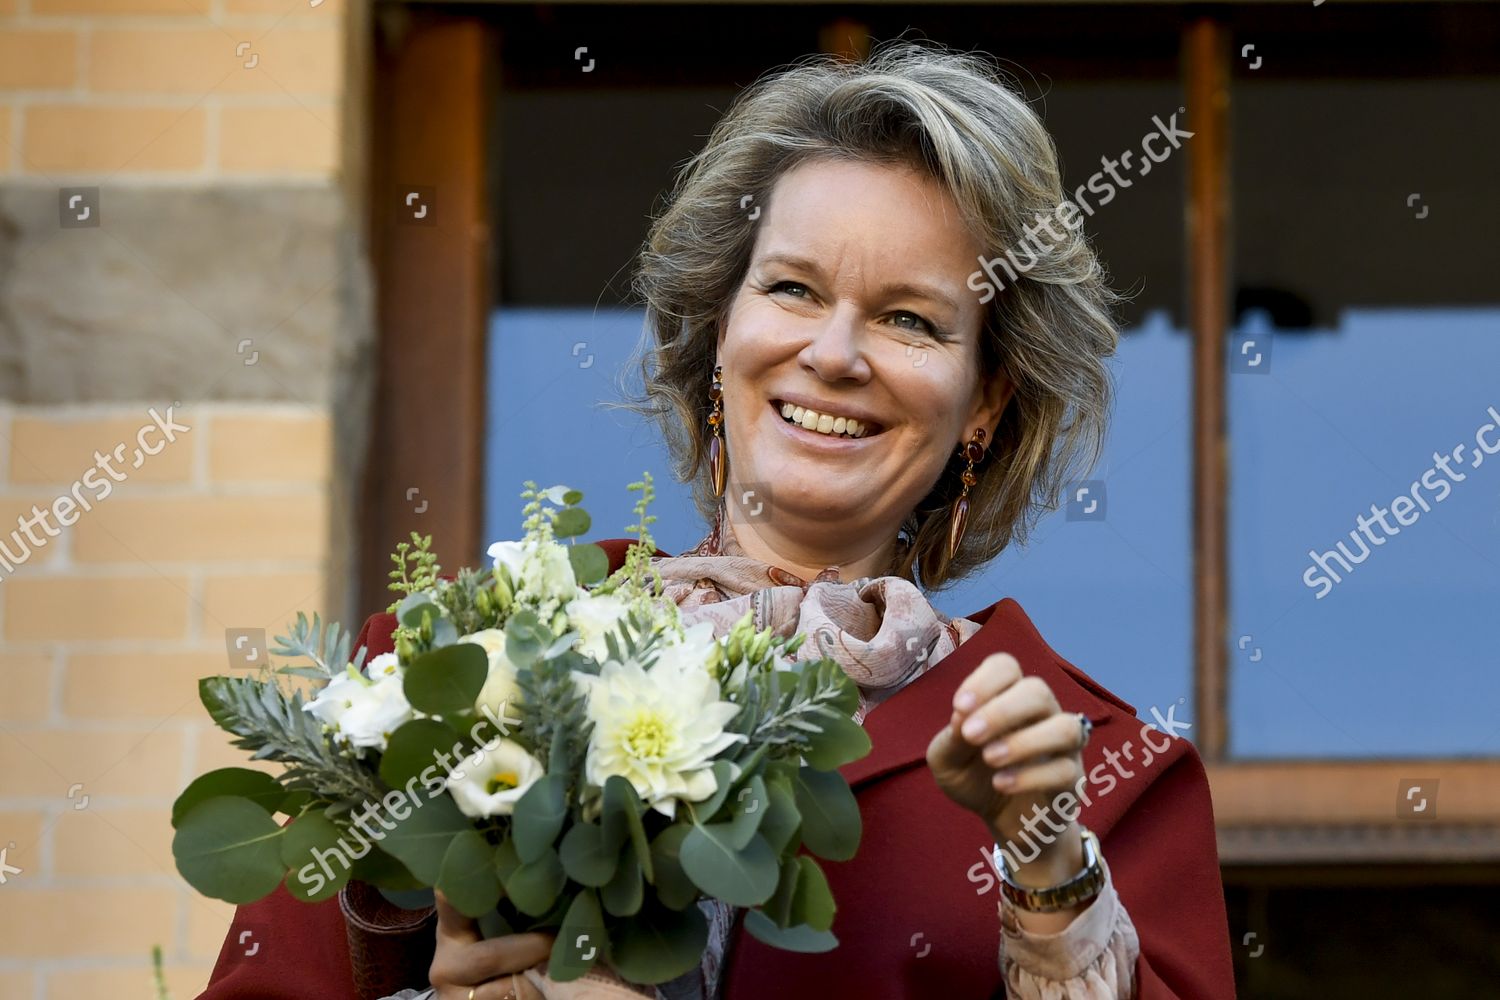 queen-mathilde-and-king-philippe-visit-the-province-of-luxembourg-vielsalm-belgium-shutterstock-editorial-12529850ay.jpg